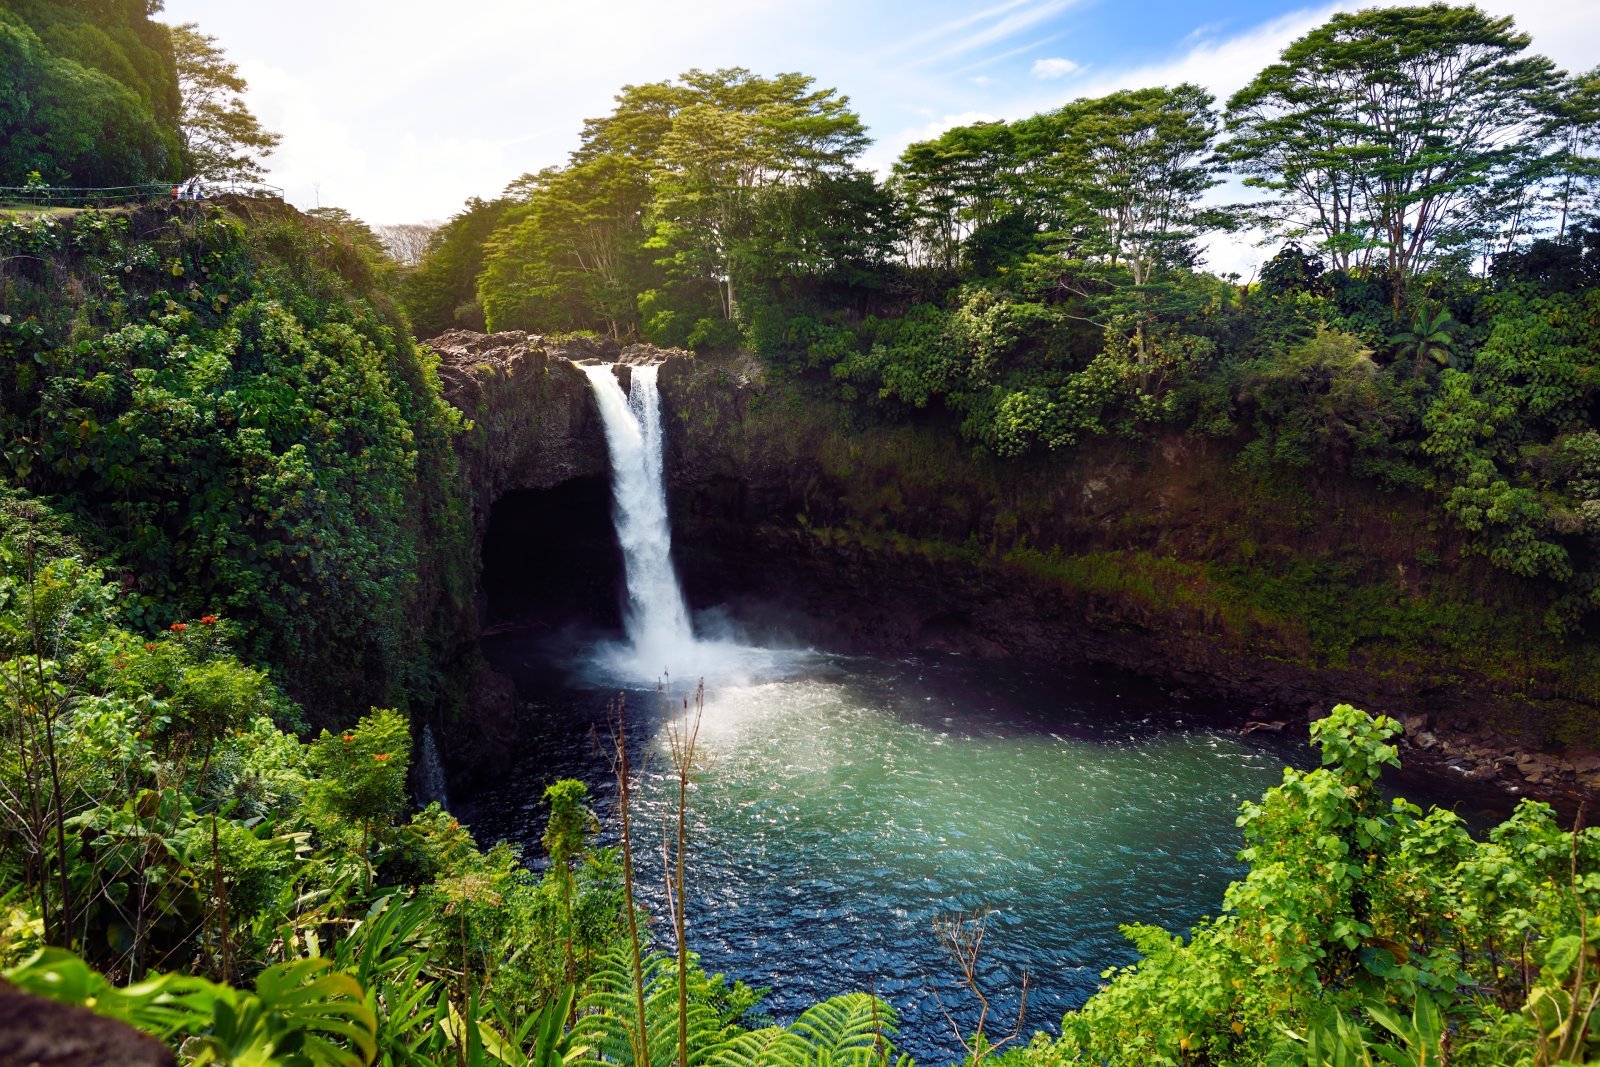 Image Credit: Shutterstock / MNStudio <p>Experience the lush landscapes and volcanic wonders of Hilo without the resort markup. It’s Hawaii at a slower, more authentic pace, allowing for a deeper connection to the island’s natural beauty.</p>